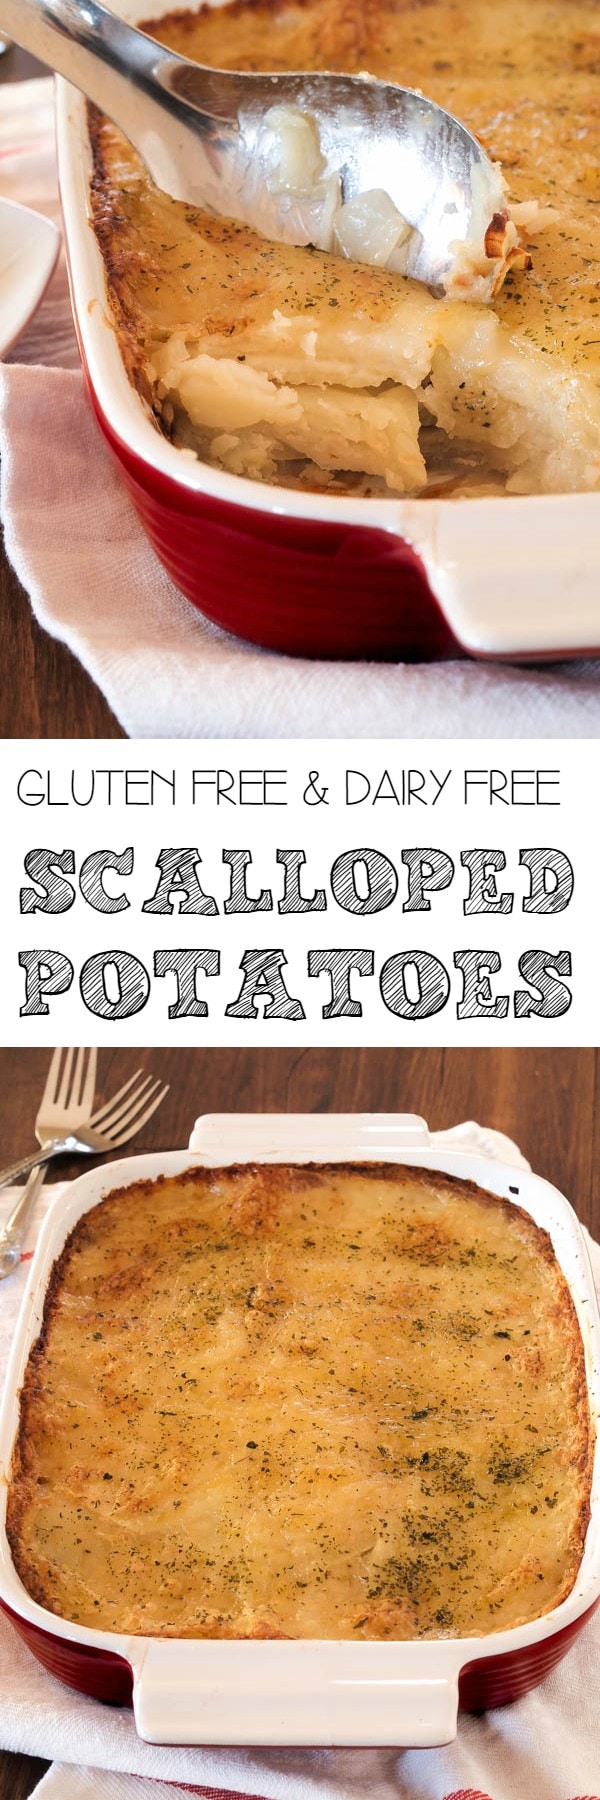 These gluten free, dairy free Scalloped Potatoes with Onions are a quick, lighter version of the old classic side dish.